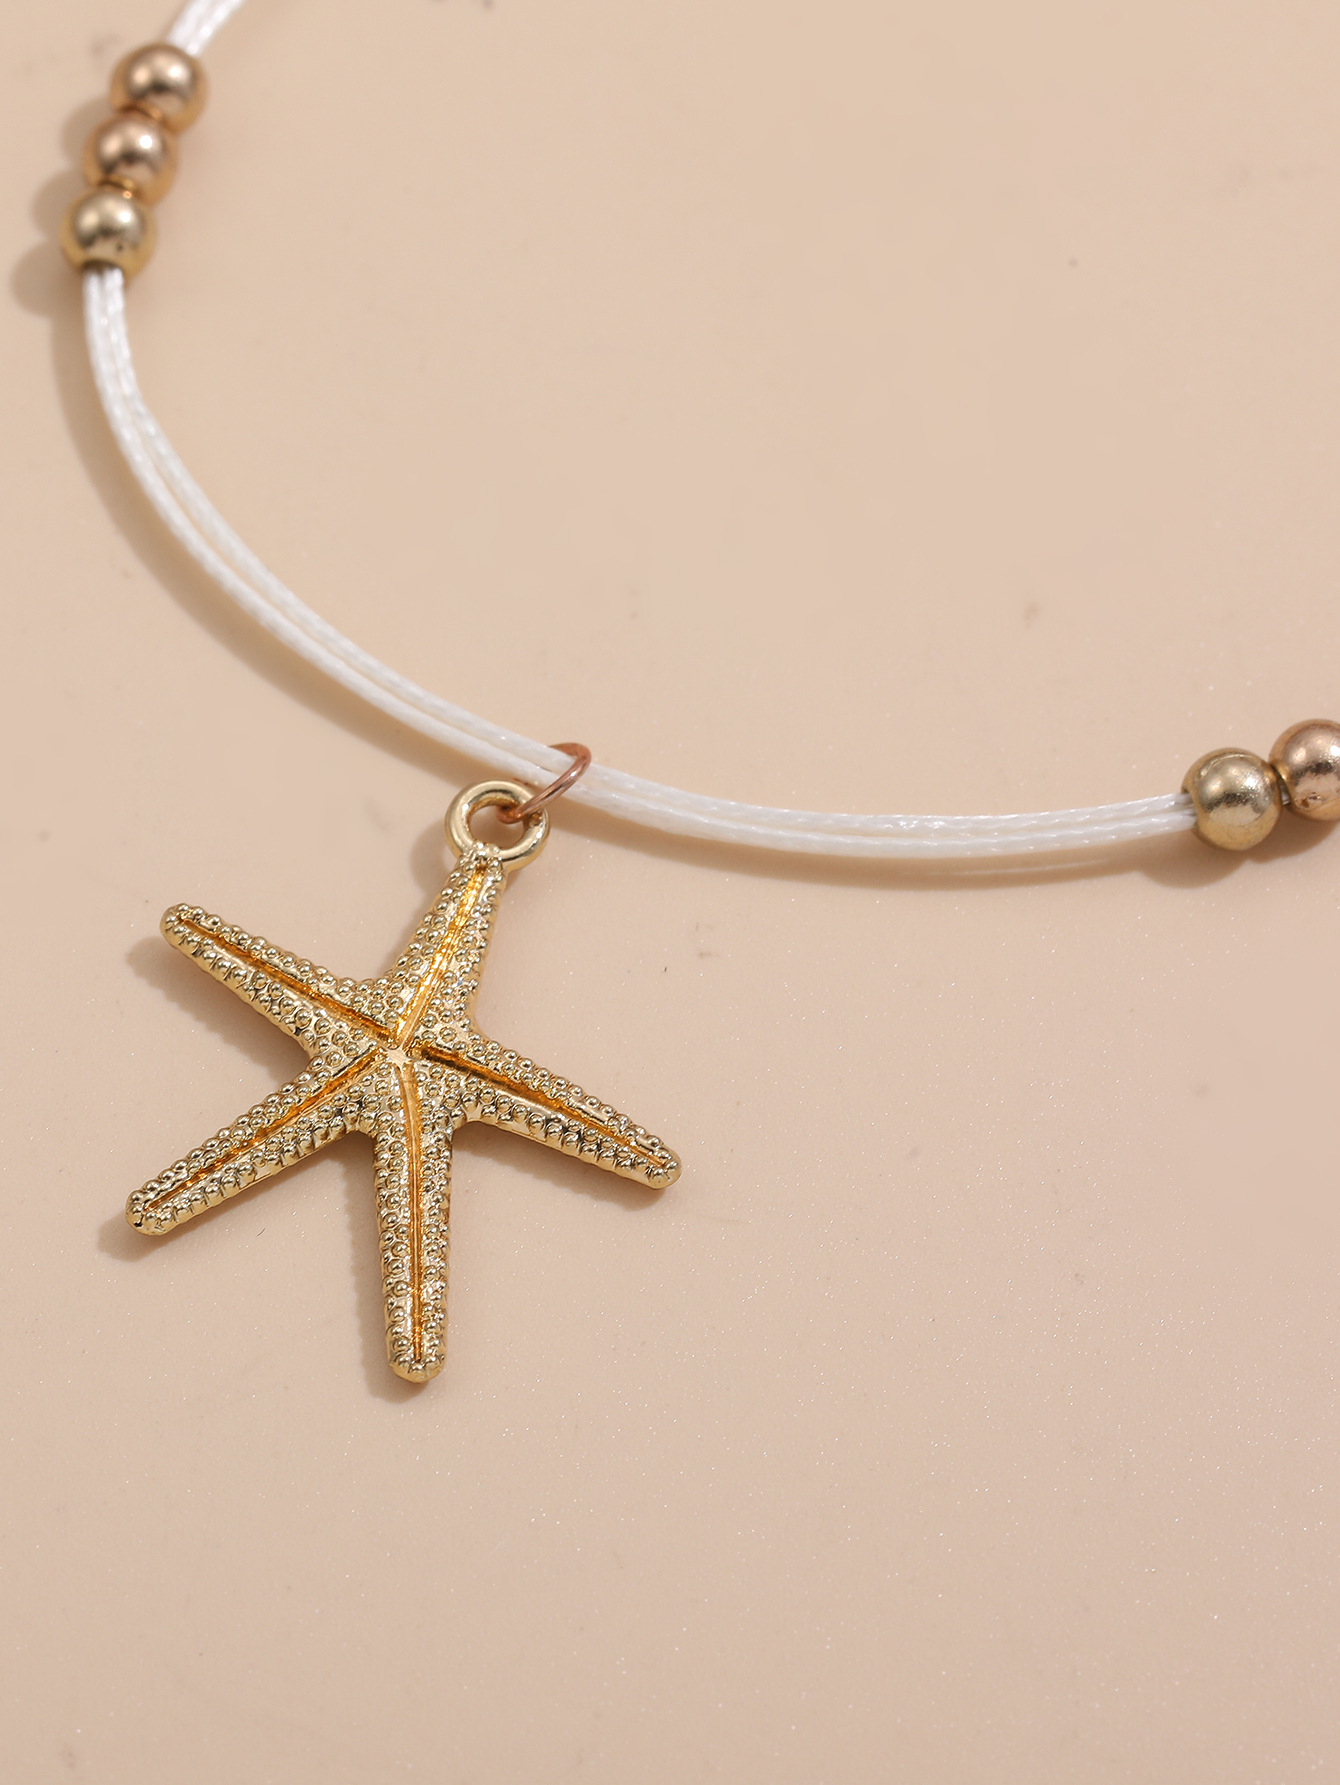 2021 European and American new personality alloy starfish bracelet ladies bracelet jewelrypicture5